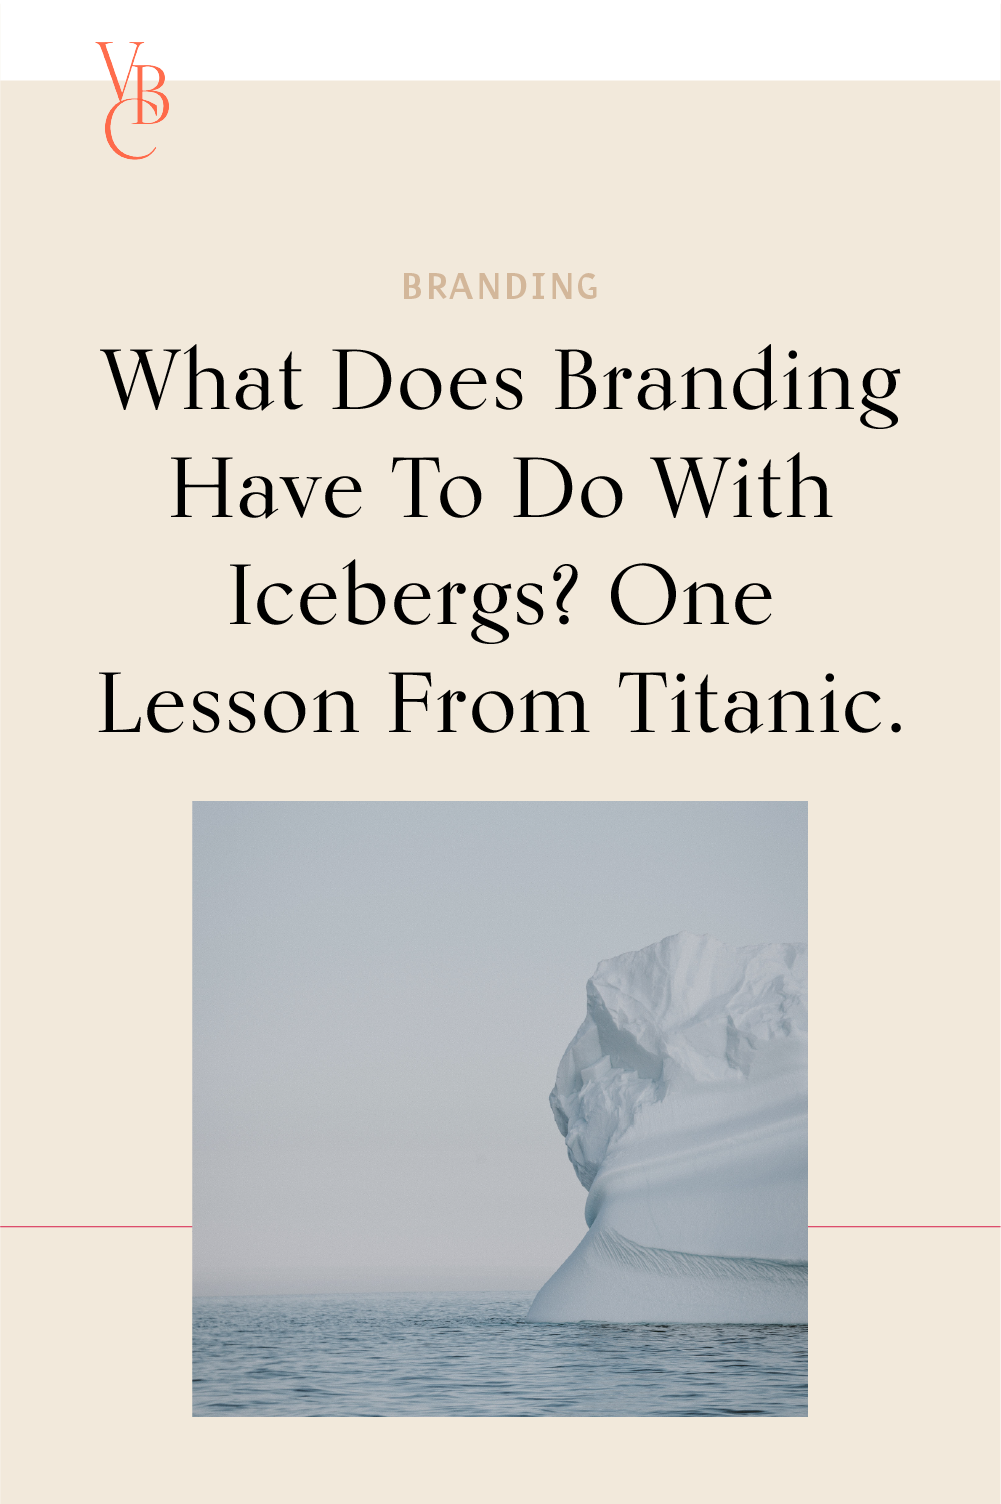 What does branding have to do with icebergs?